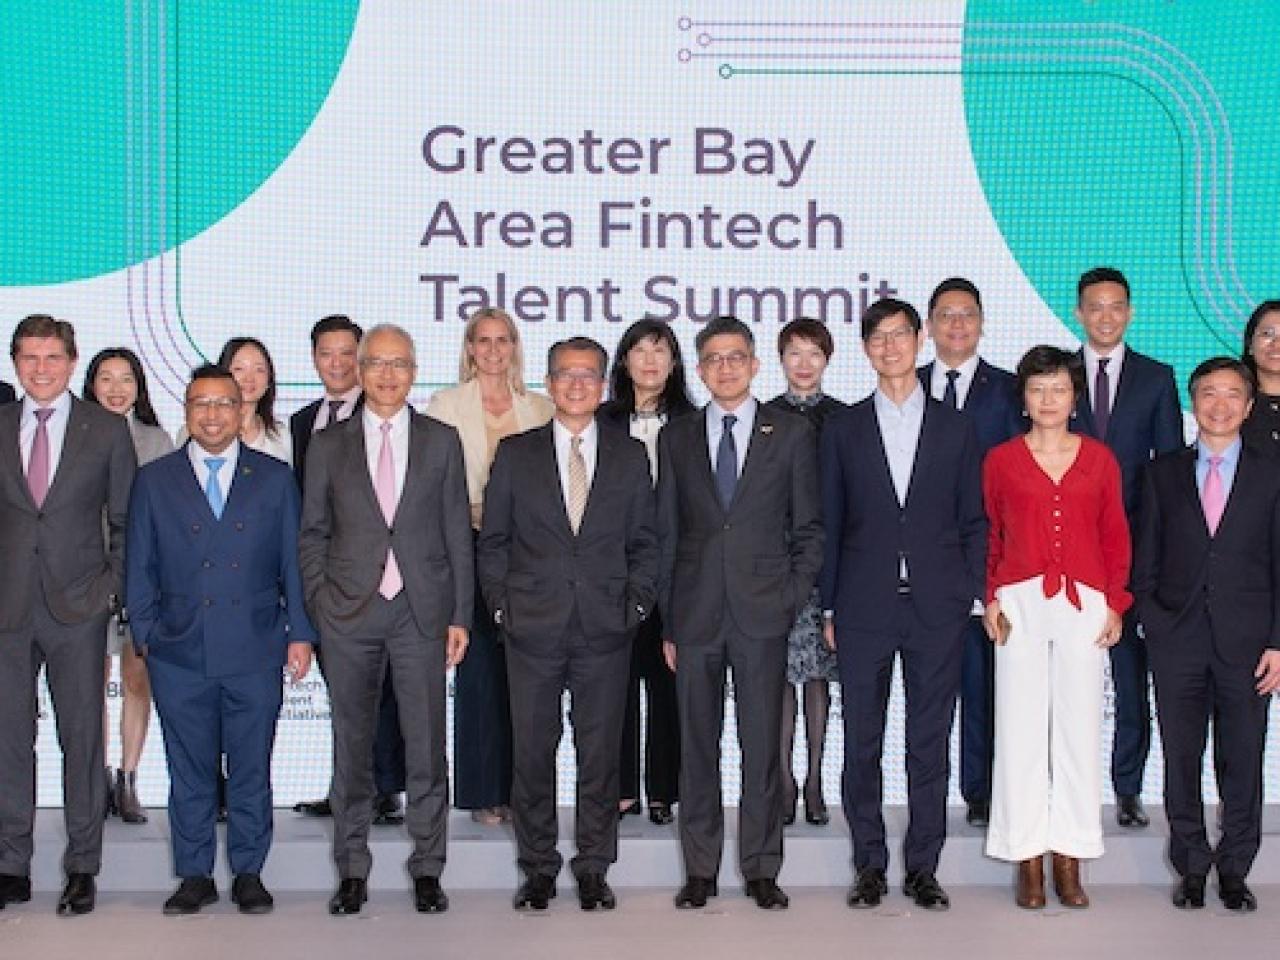 Group gathered at Greater Bay Area (GBA) Fintech Talent Summit